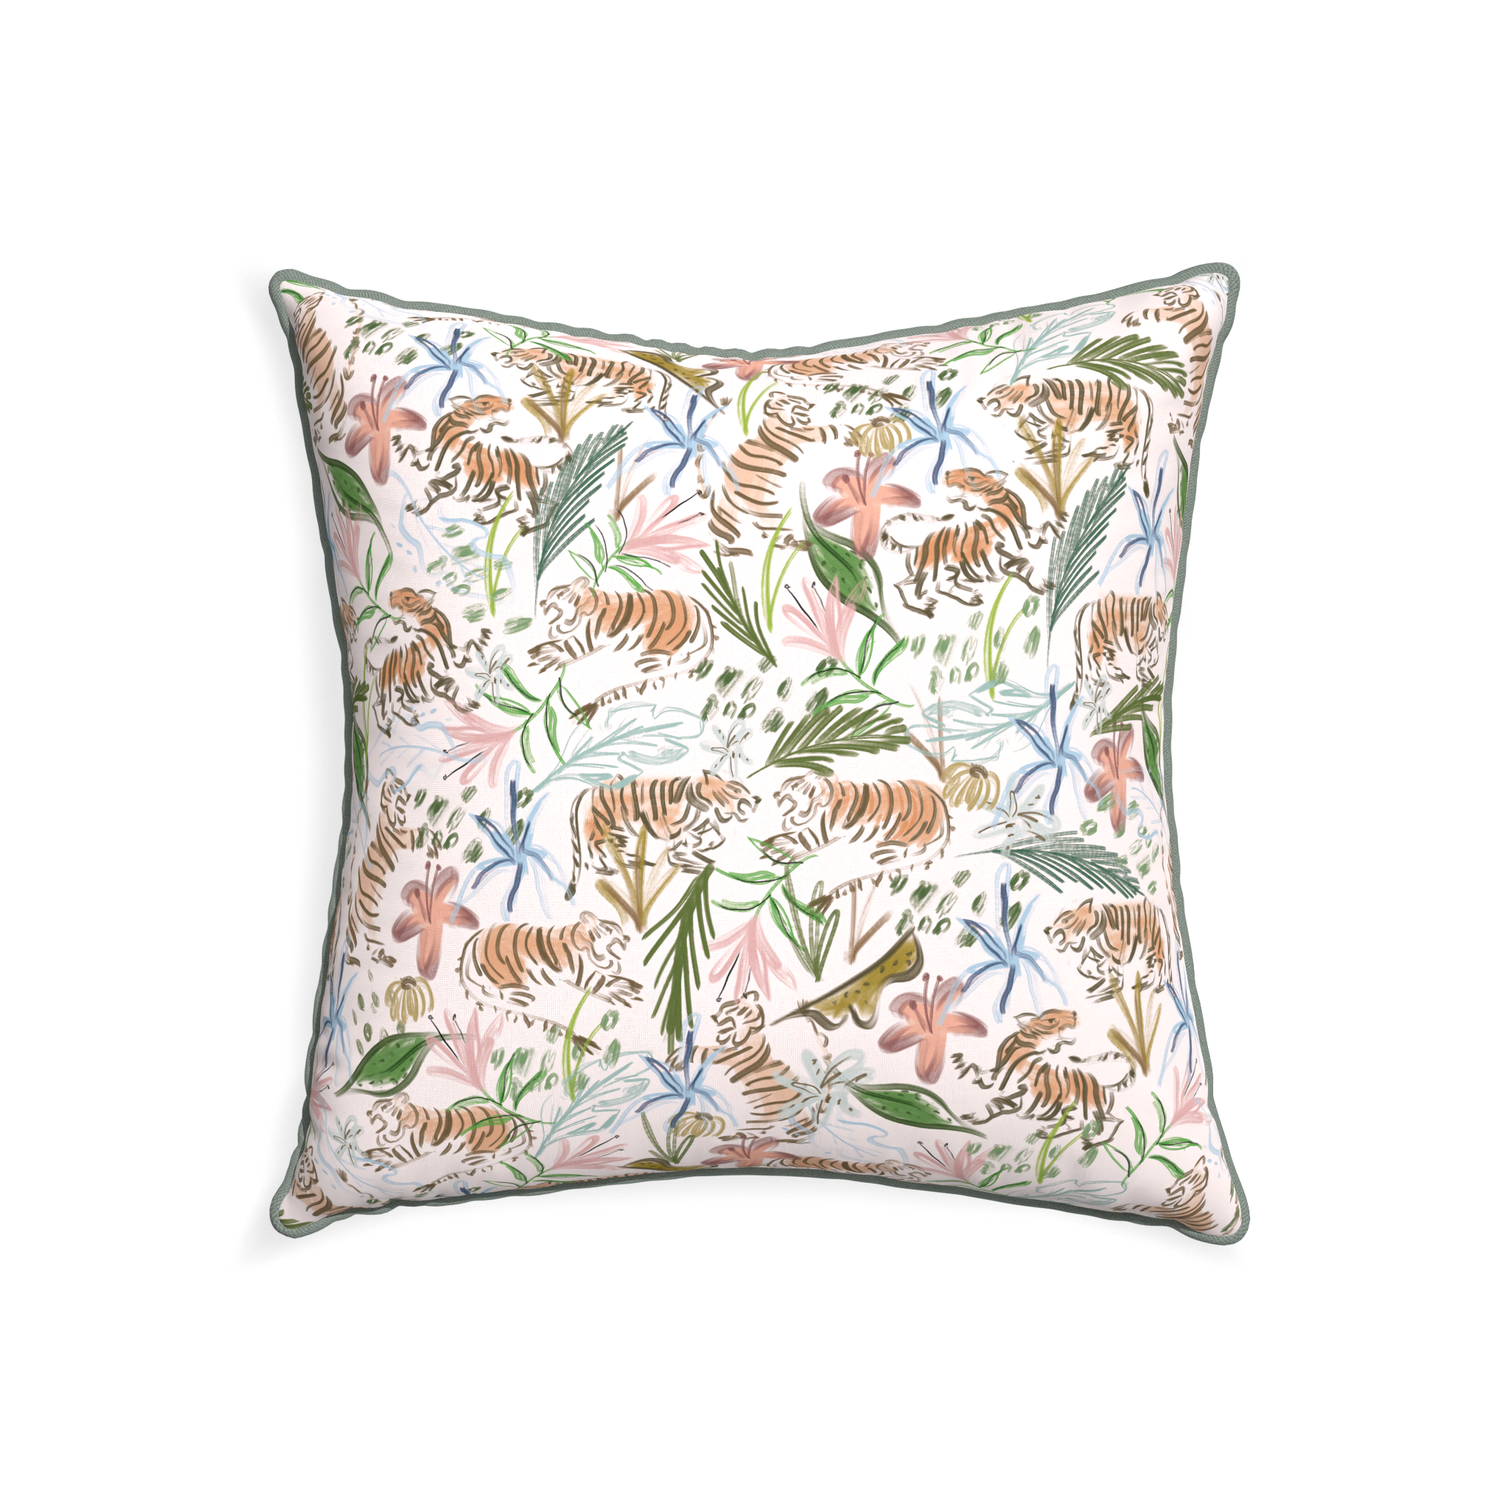 22-square frida pink custom pink chinoiserie tigerpillow with sage piping on white background